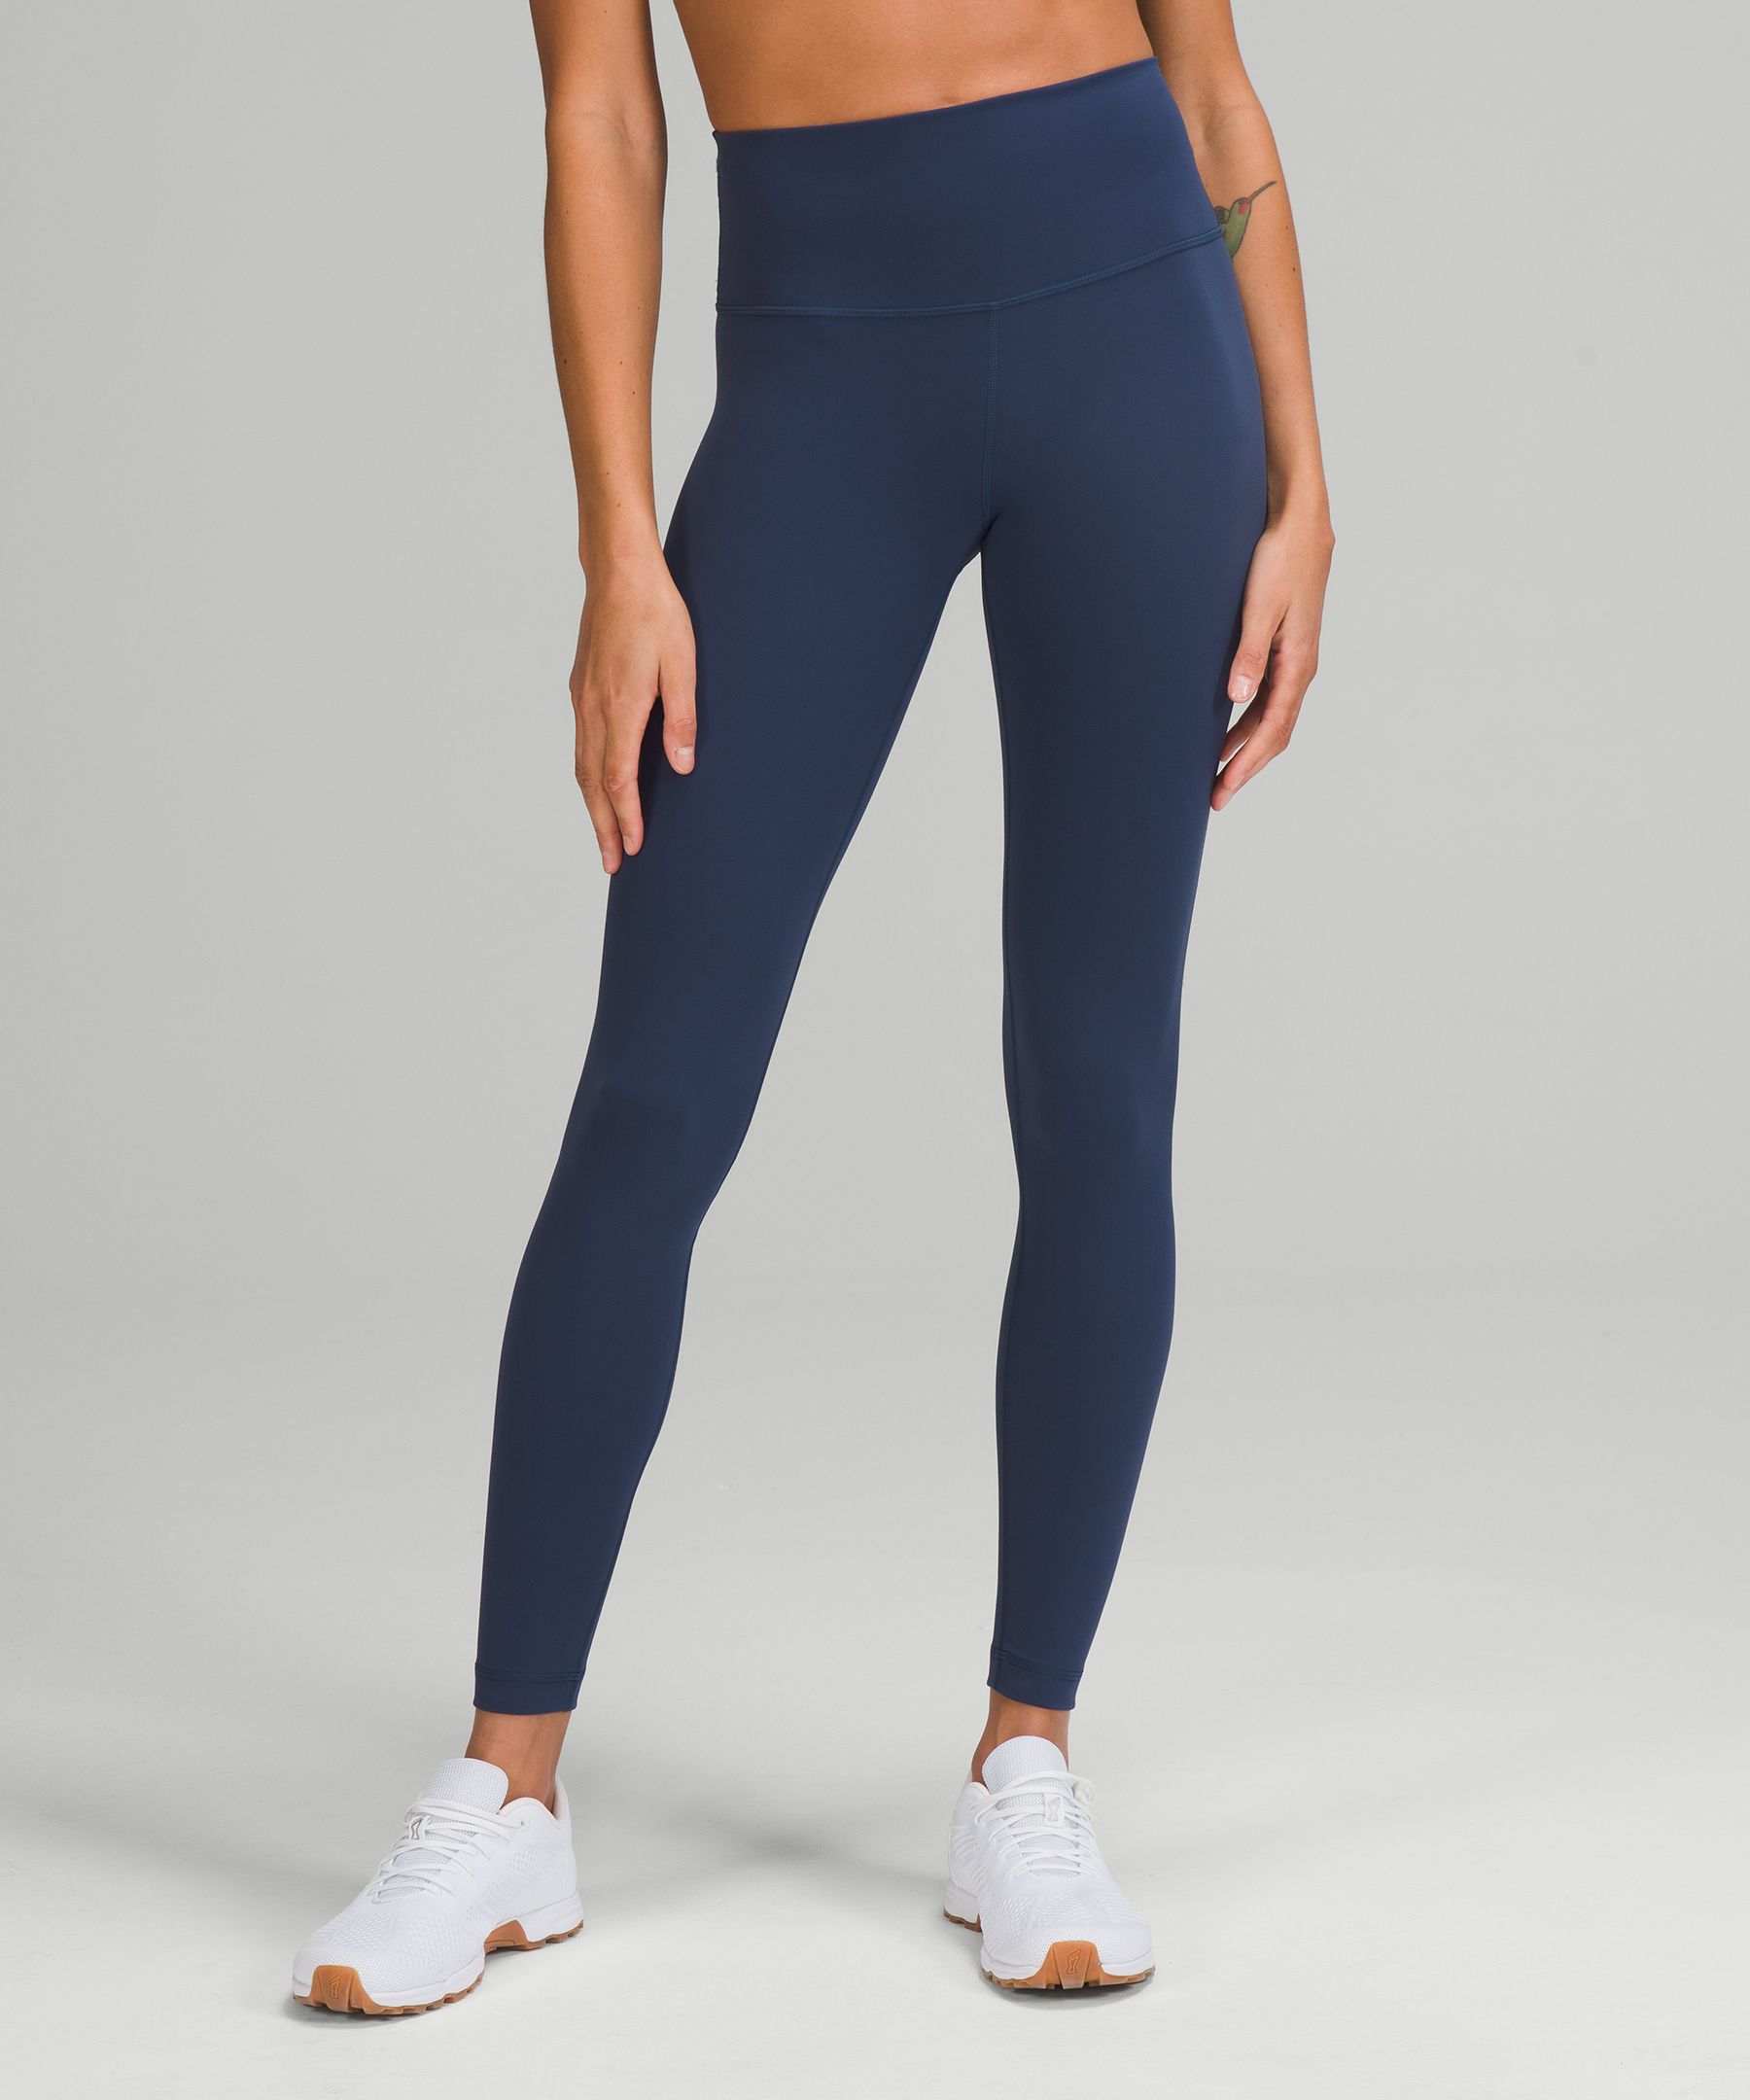 Lululemon Wunder Train High-rise Tights 28" In Mineral Blue